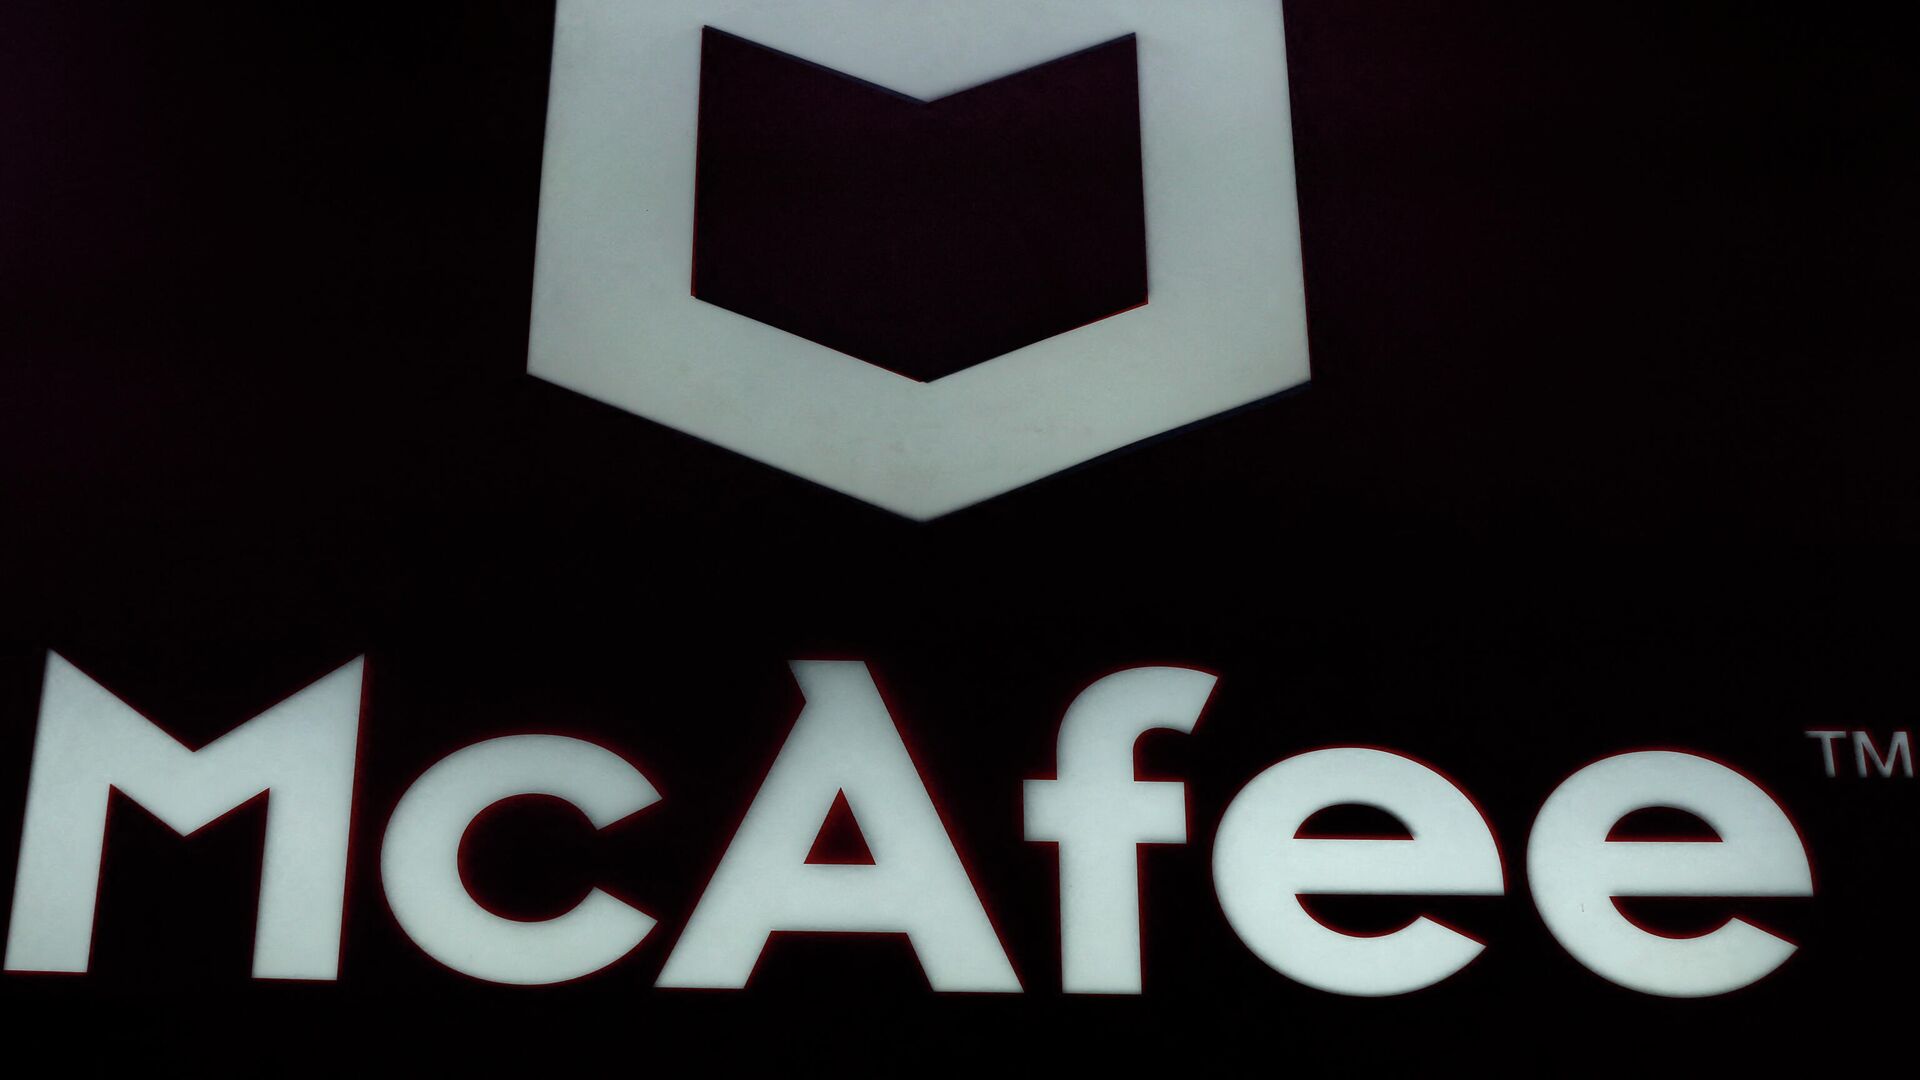 In this file photo taken on February 25, 2019 The McAfee logo is displayed at the Mobile World Congress (MWC) in Barcelona on February 25, 2019. - Sputnik International, 1920, 08.11.2021